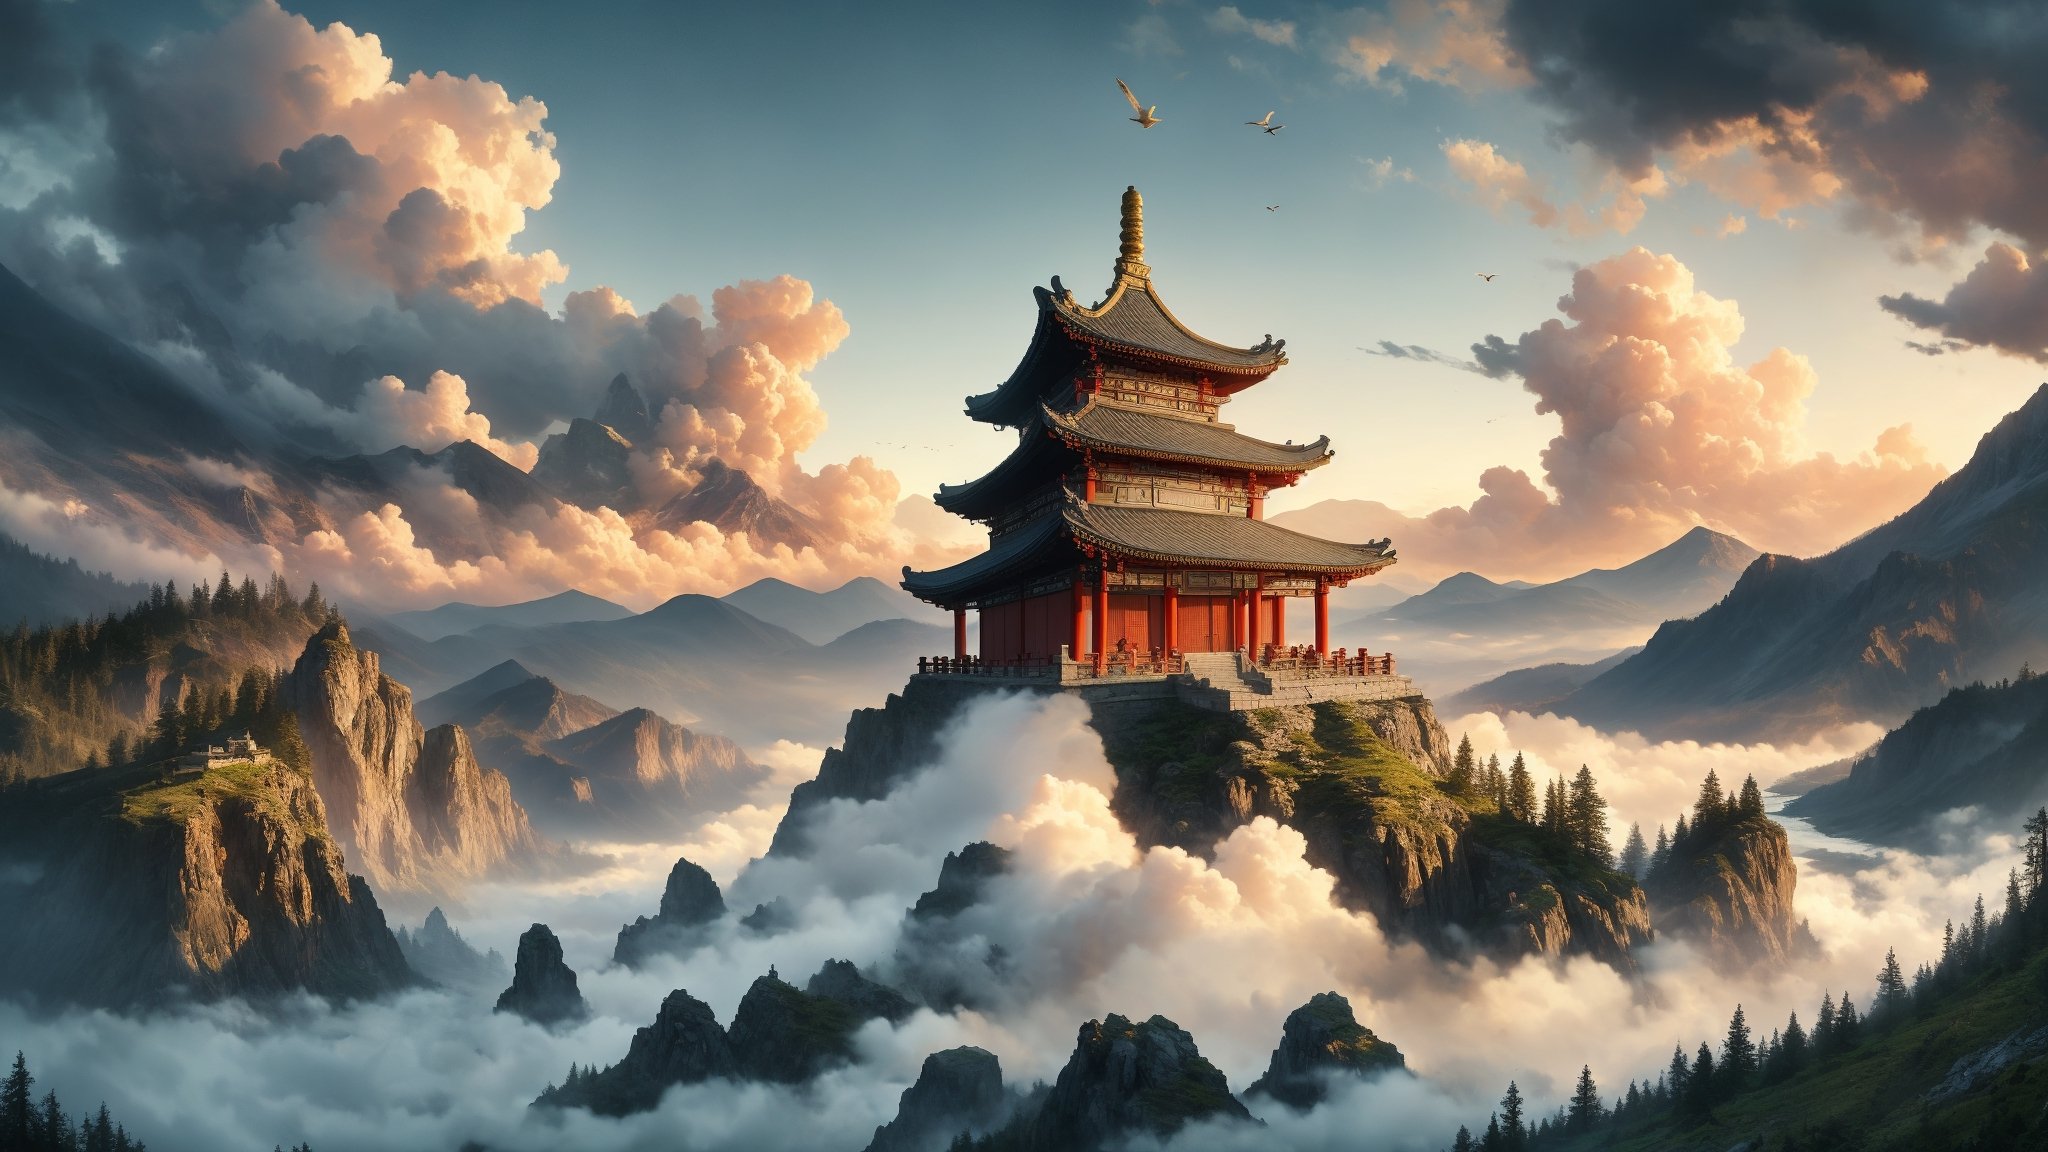 water, smoke, mountains, Chinese temple, clouds, birds, at Twilight, tilt shift, Cleancore, HDR, Mustafa Abdulhadi, involved in a project,  DonM3l3m3nt4l, 